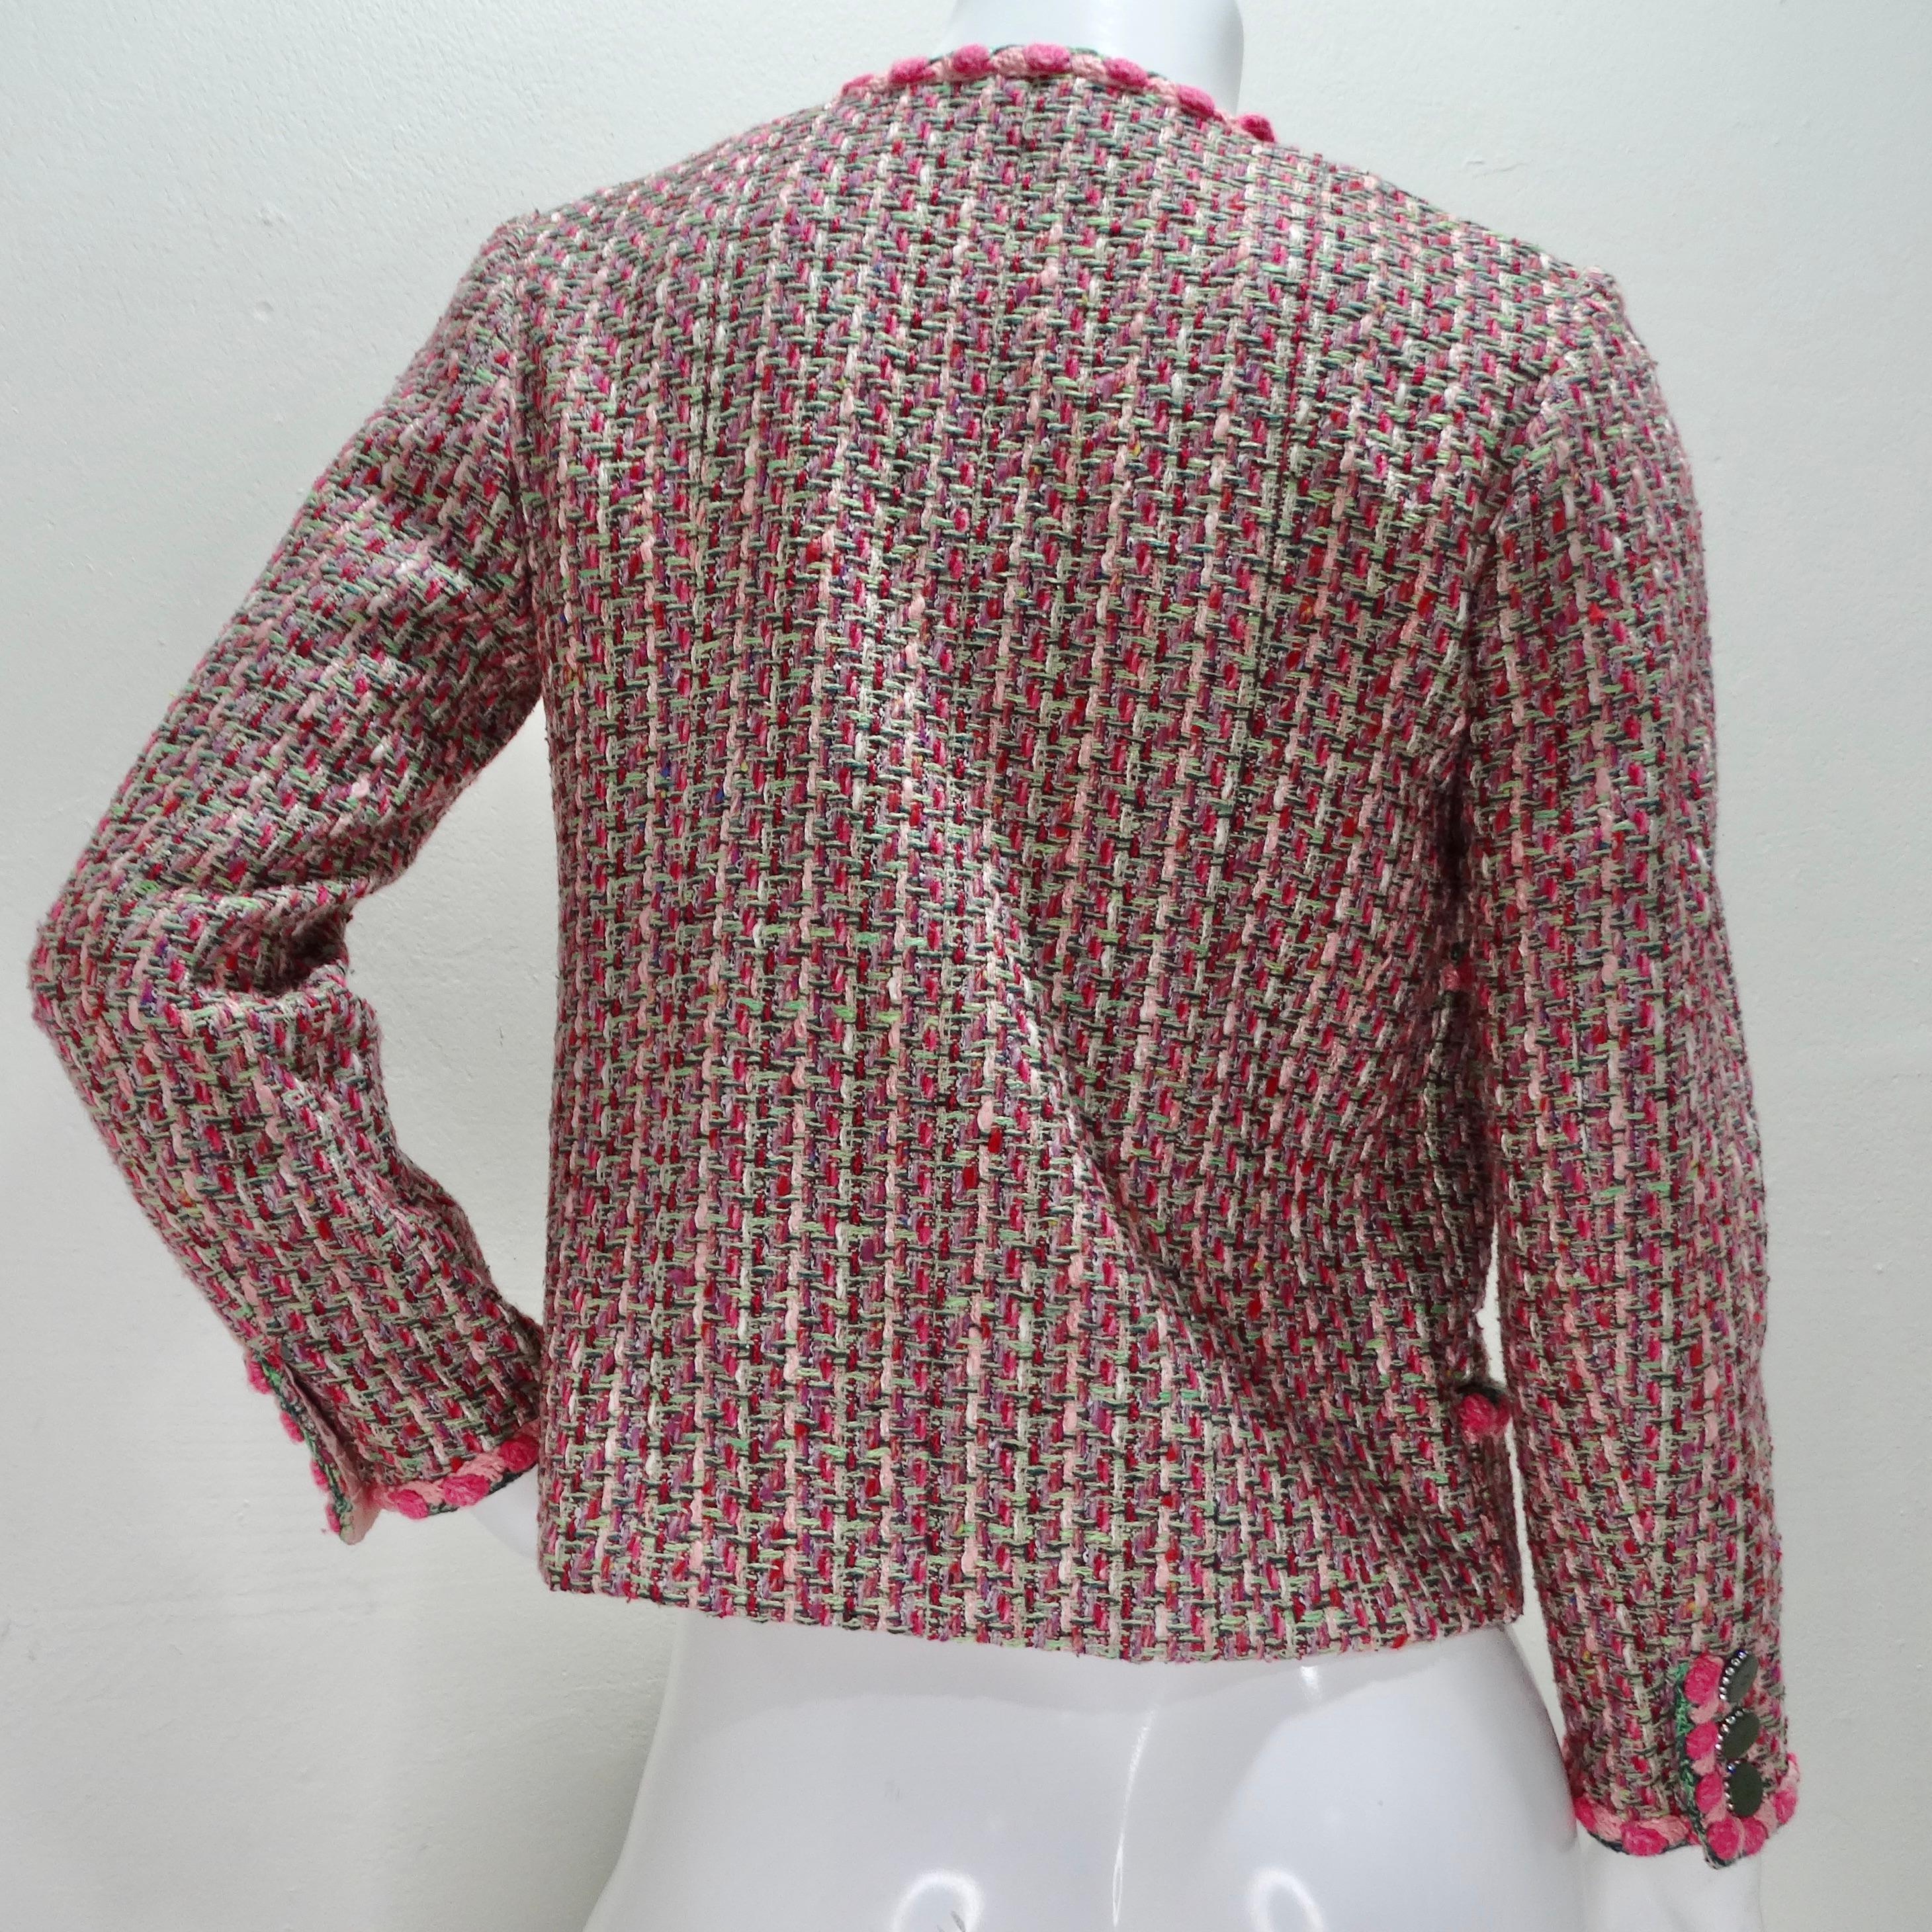 Chanel 2002 Pink Tweed Evening Jacket For Sale 3